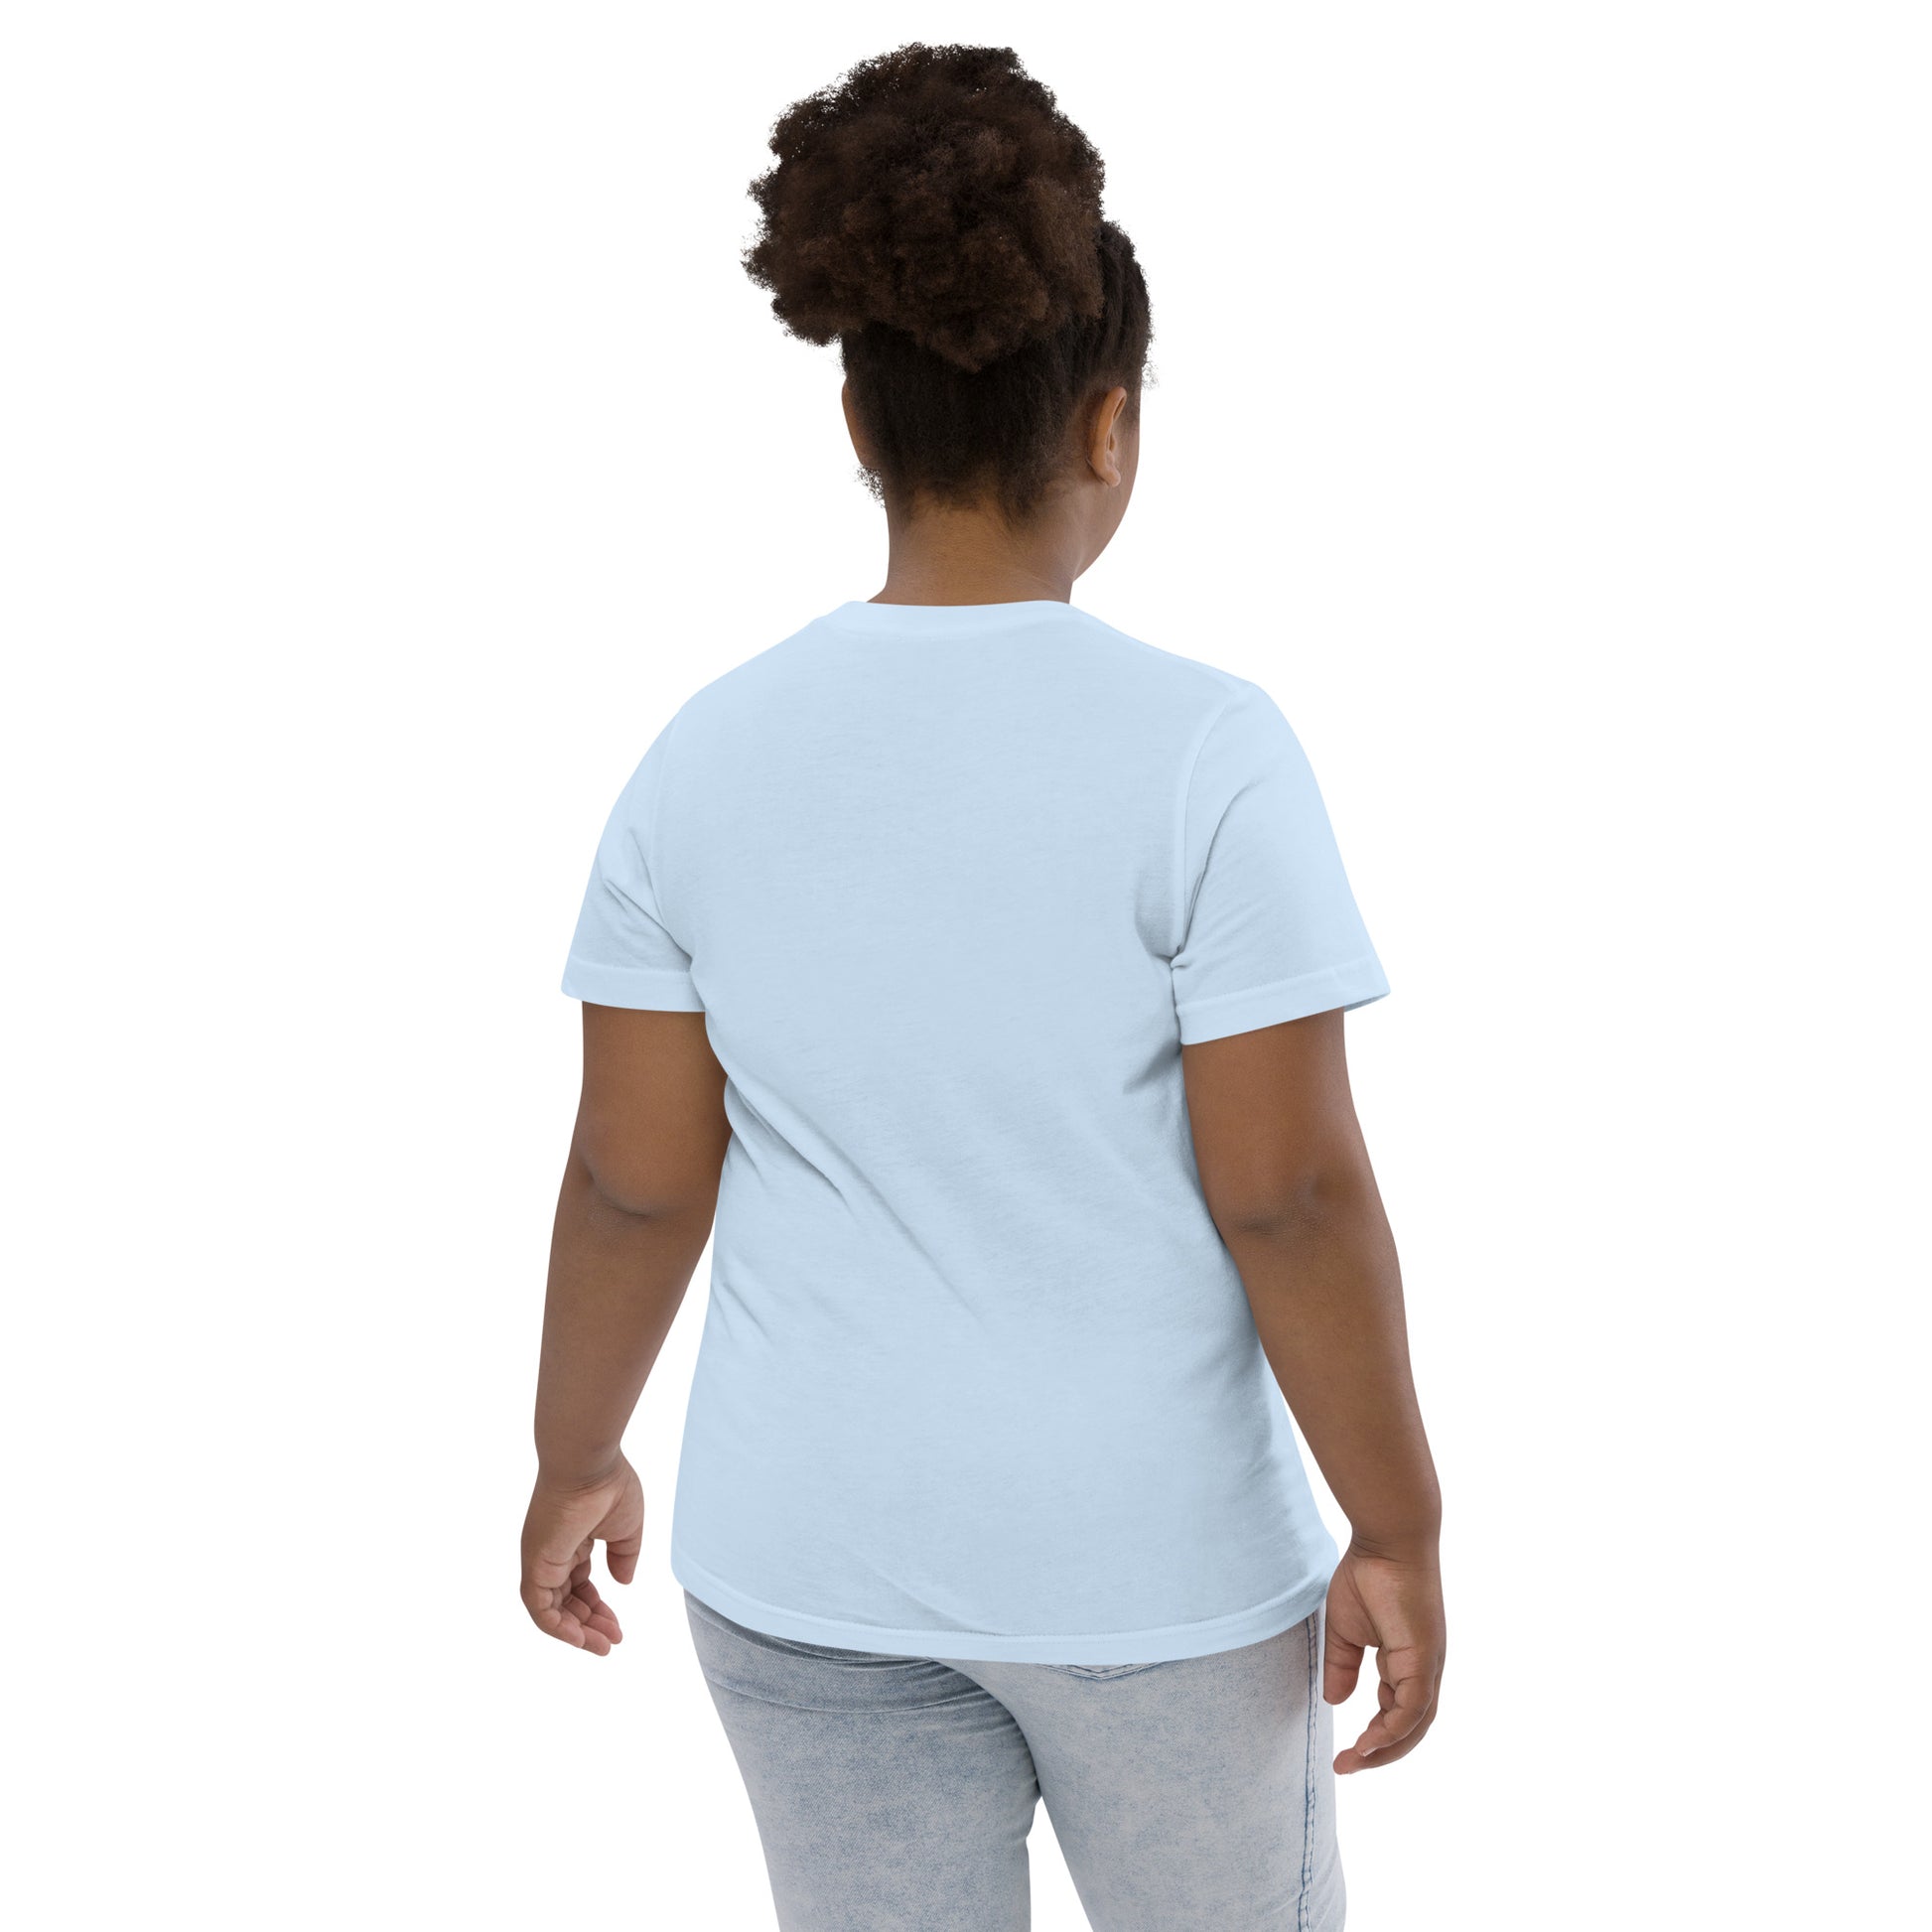  Kids T-Shirt - Light Blue - back view, being warn on a girl standing with her arms by her side - Go Sea Kayak Byron Bay Crew (issue 2018-2019) logo on front - Genuine Byron Bay Merchandise | Produced by Go Sea Kayak Byron Bay 